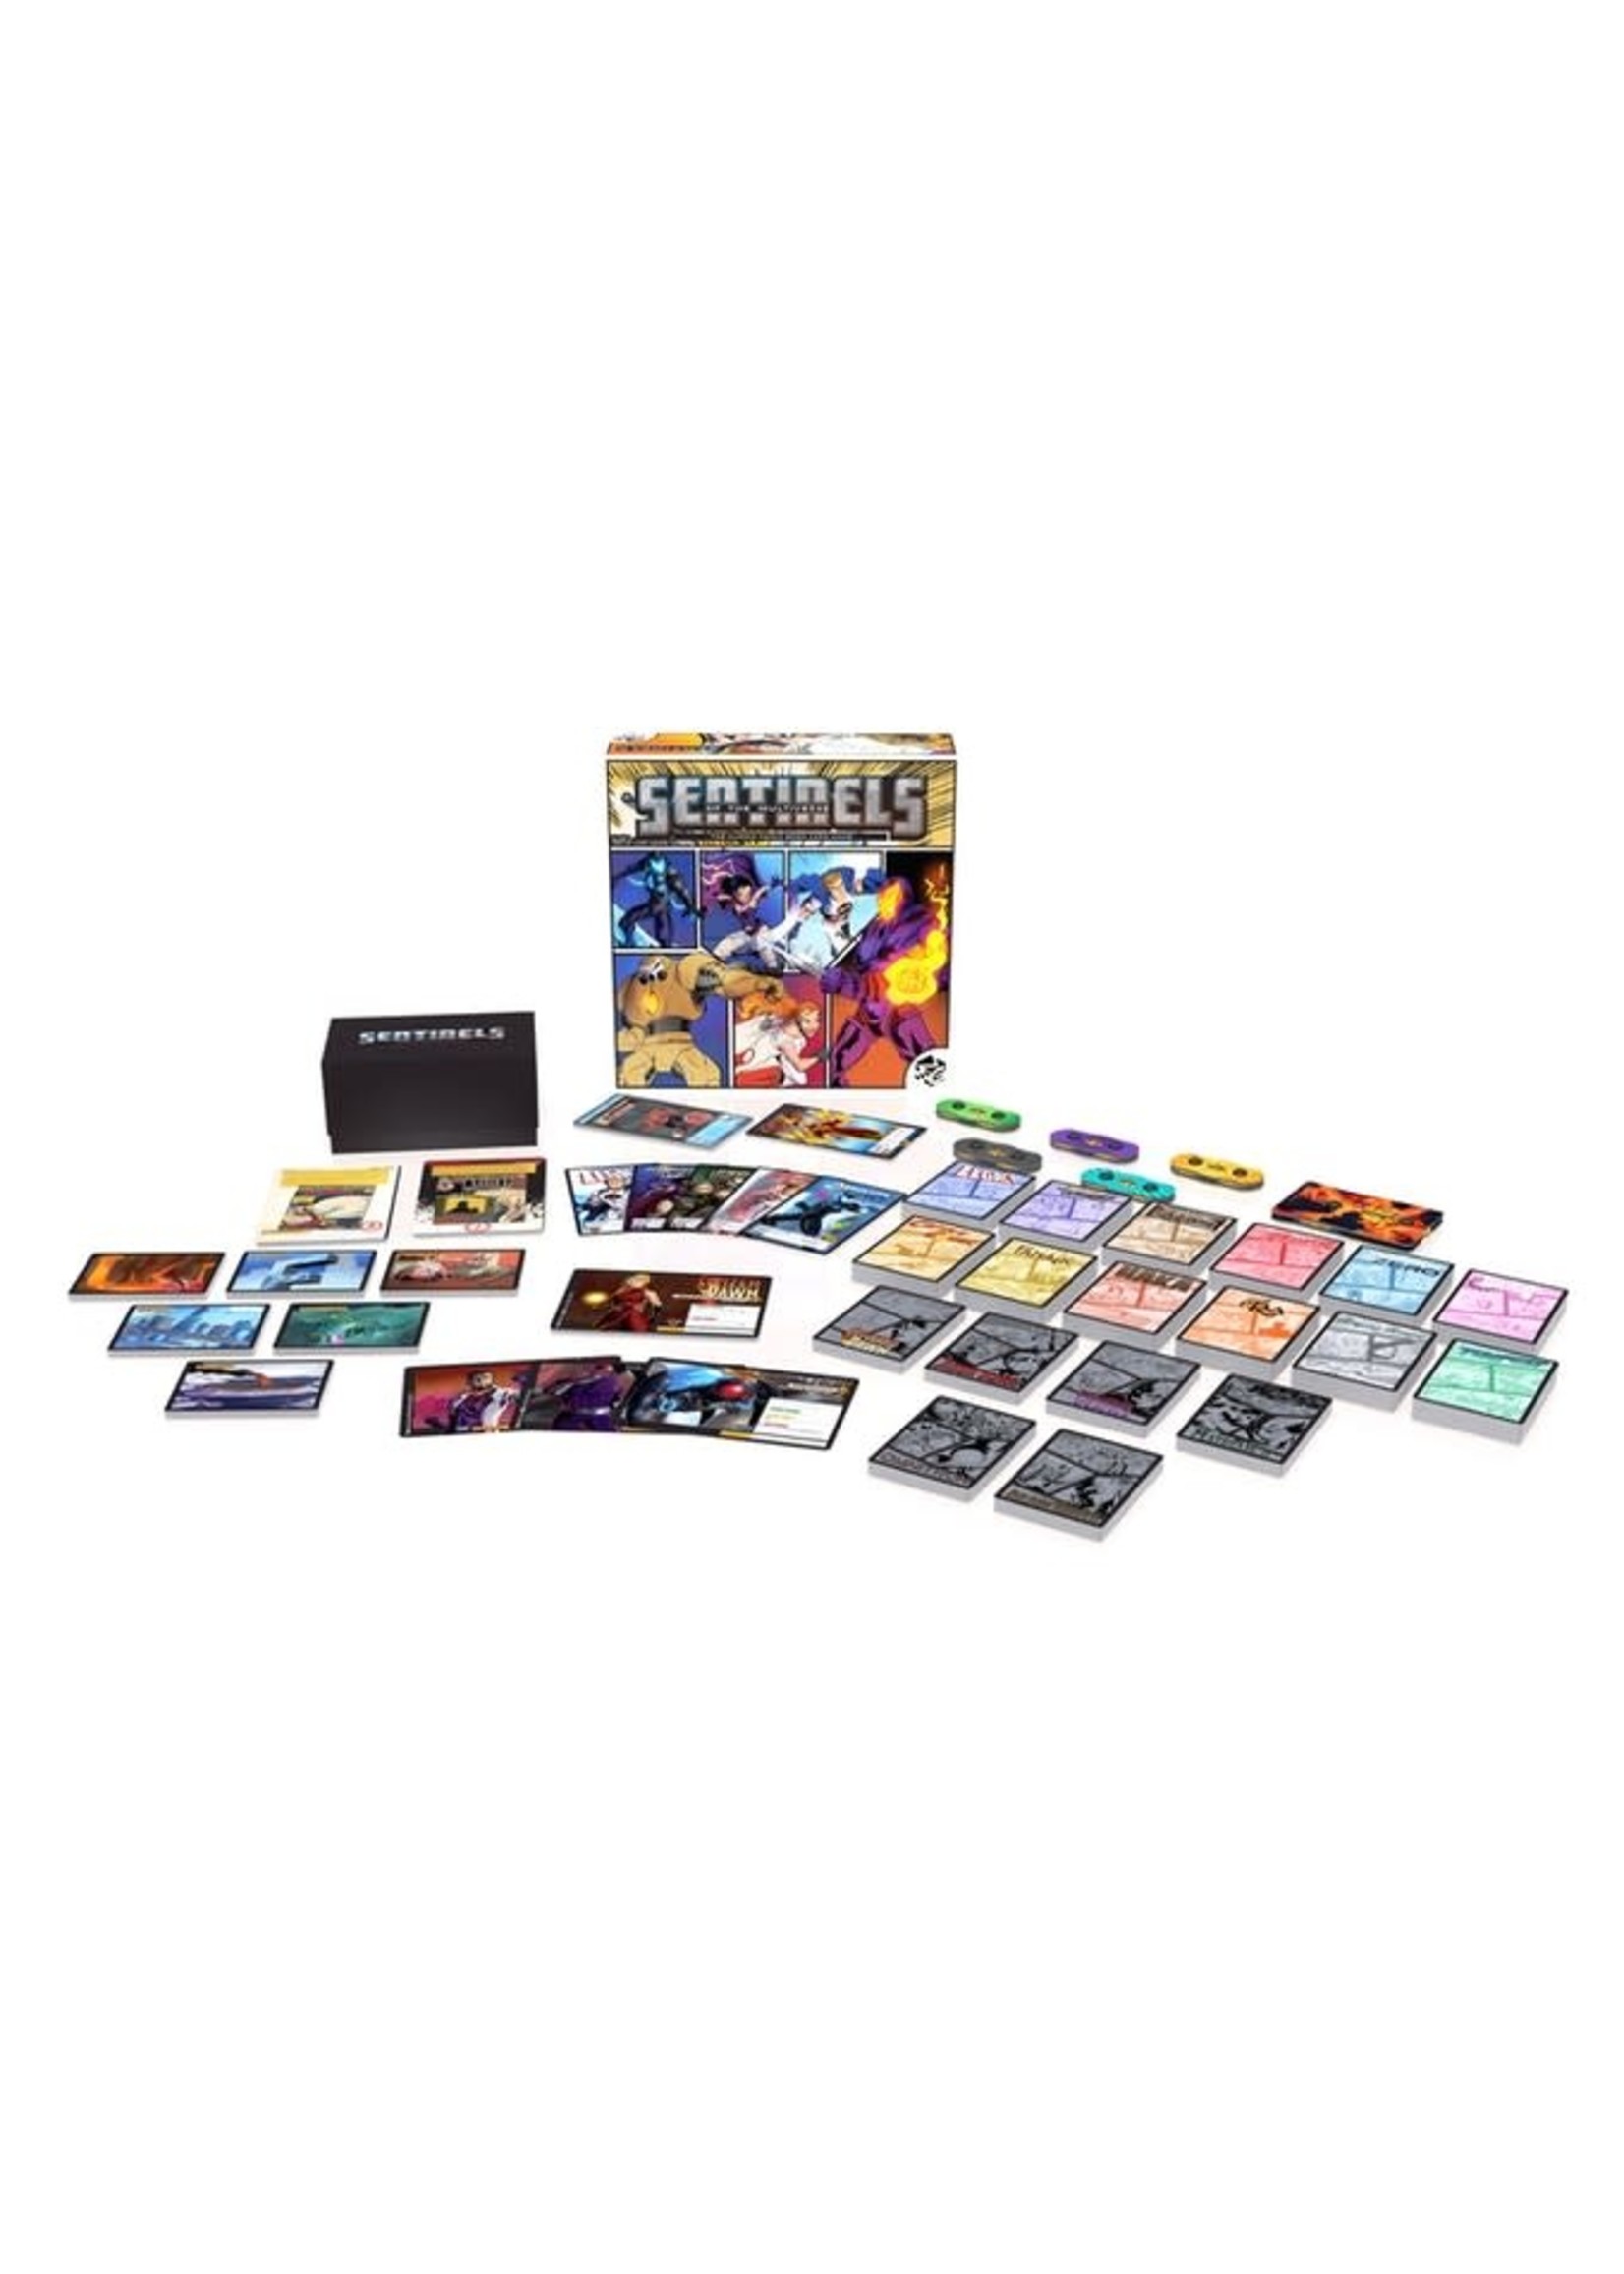 Greater Than Games Sentinels of the Multiverse: Definitive Edition